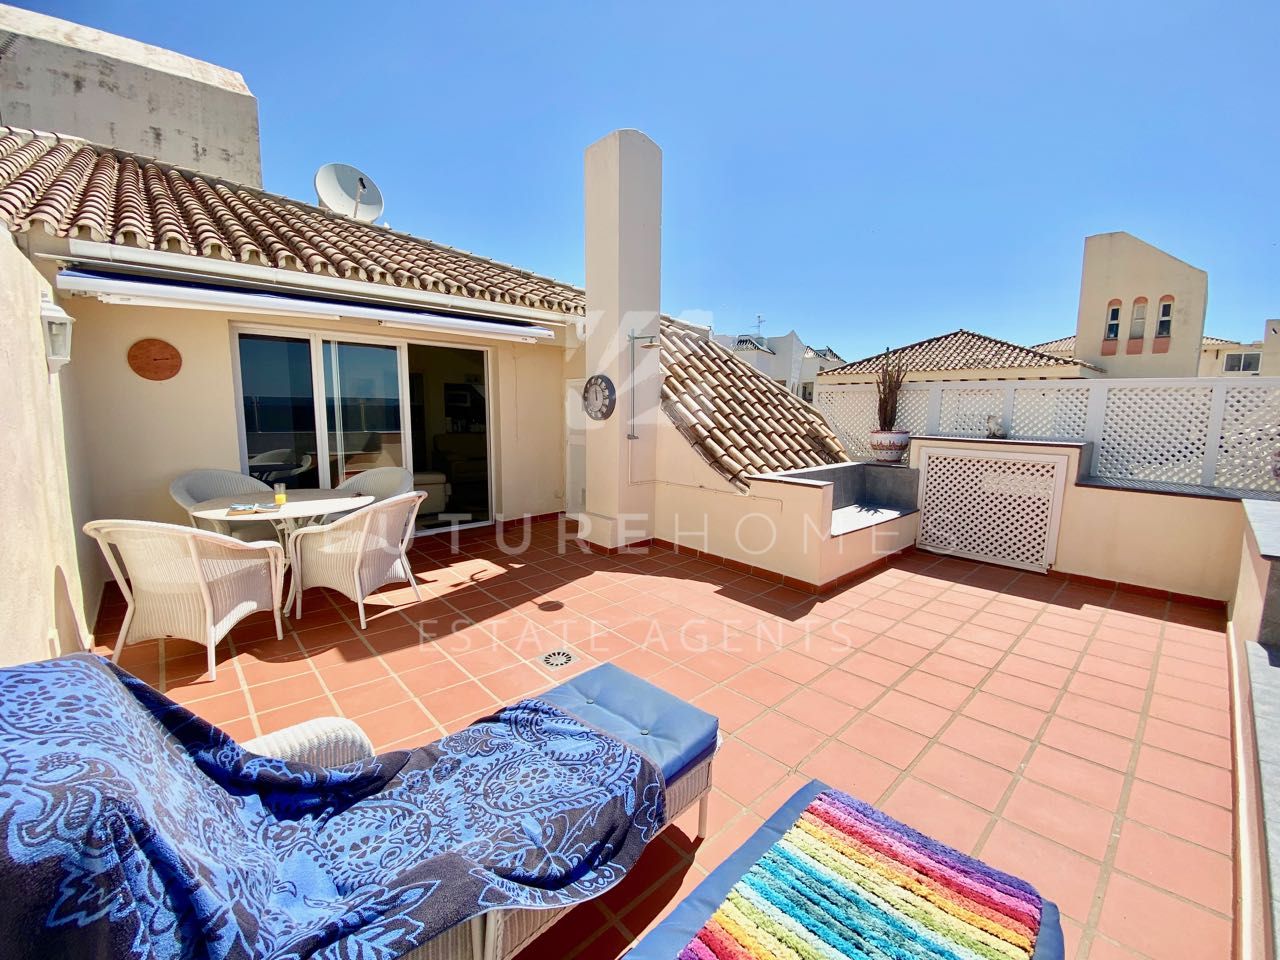 Fantastic frontline beach penthouse duplex with incredible sea views in Estepona